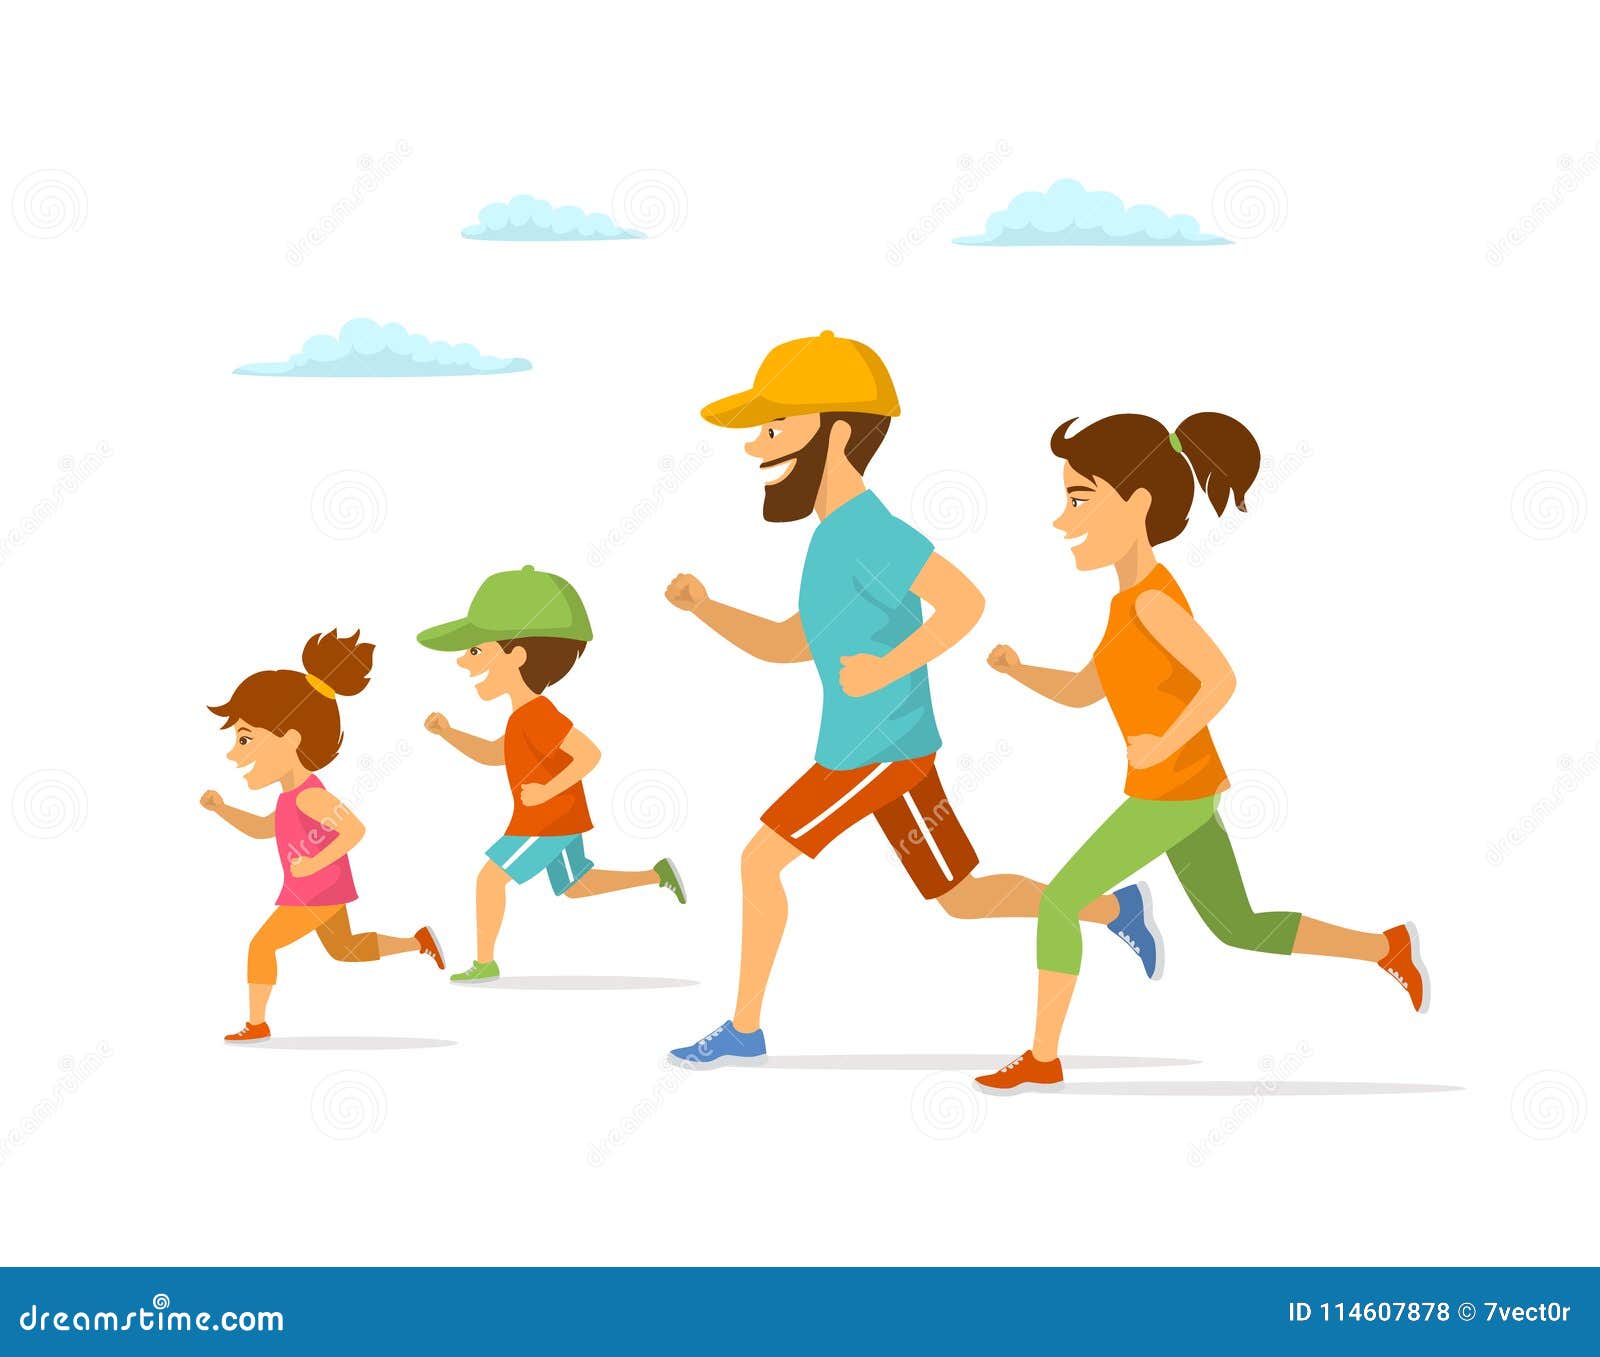 cute cheerful cartoon family running jogging together    outdoor exercising i